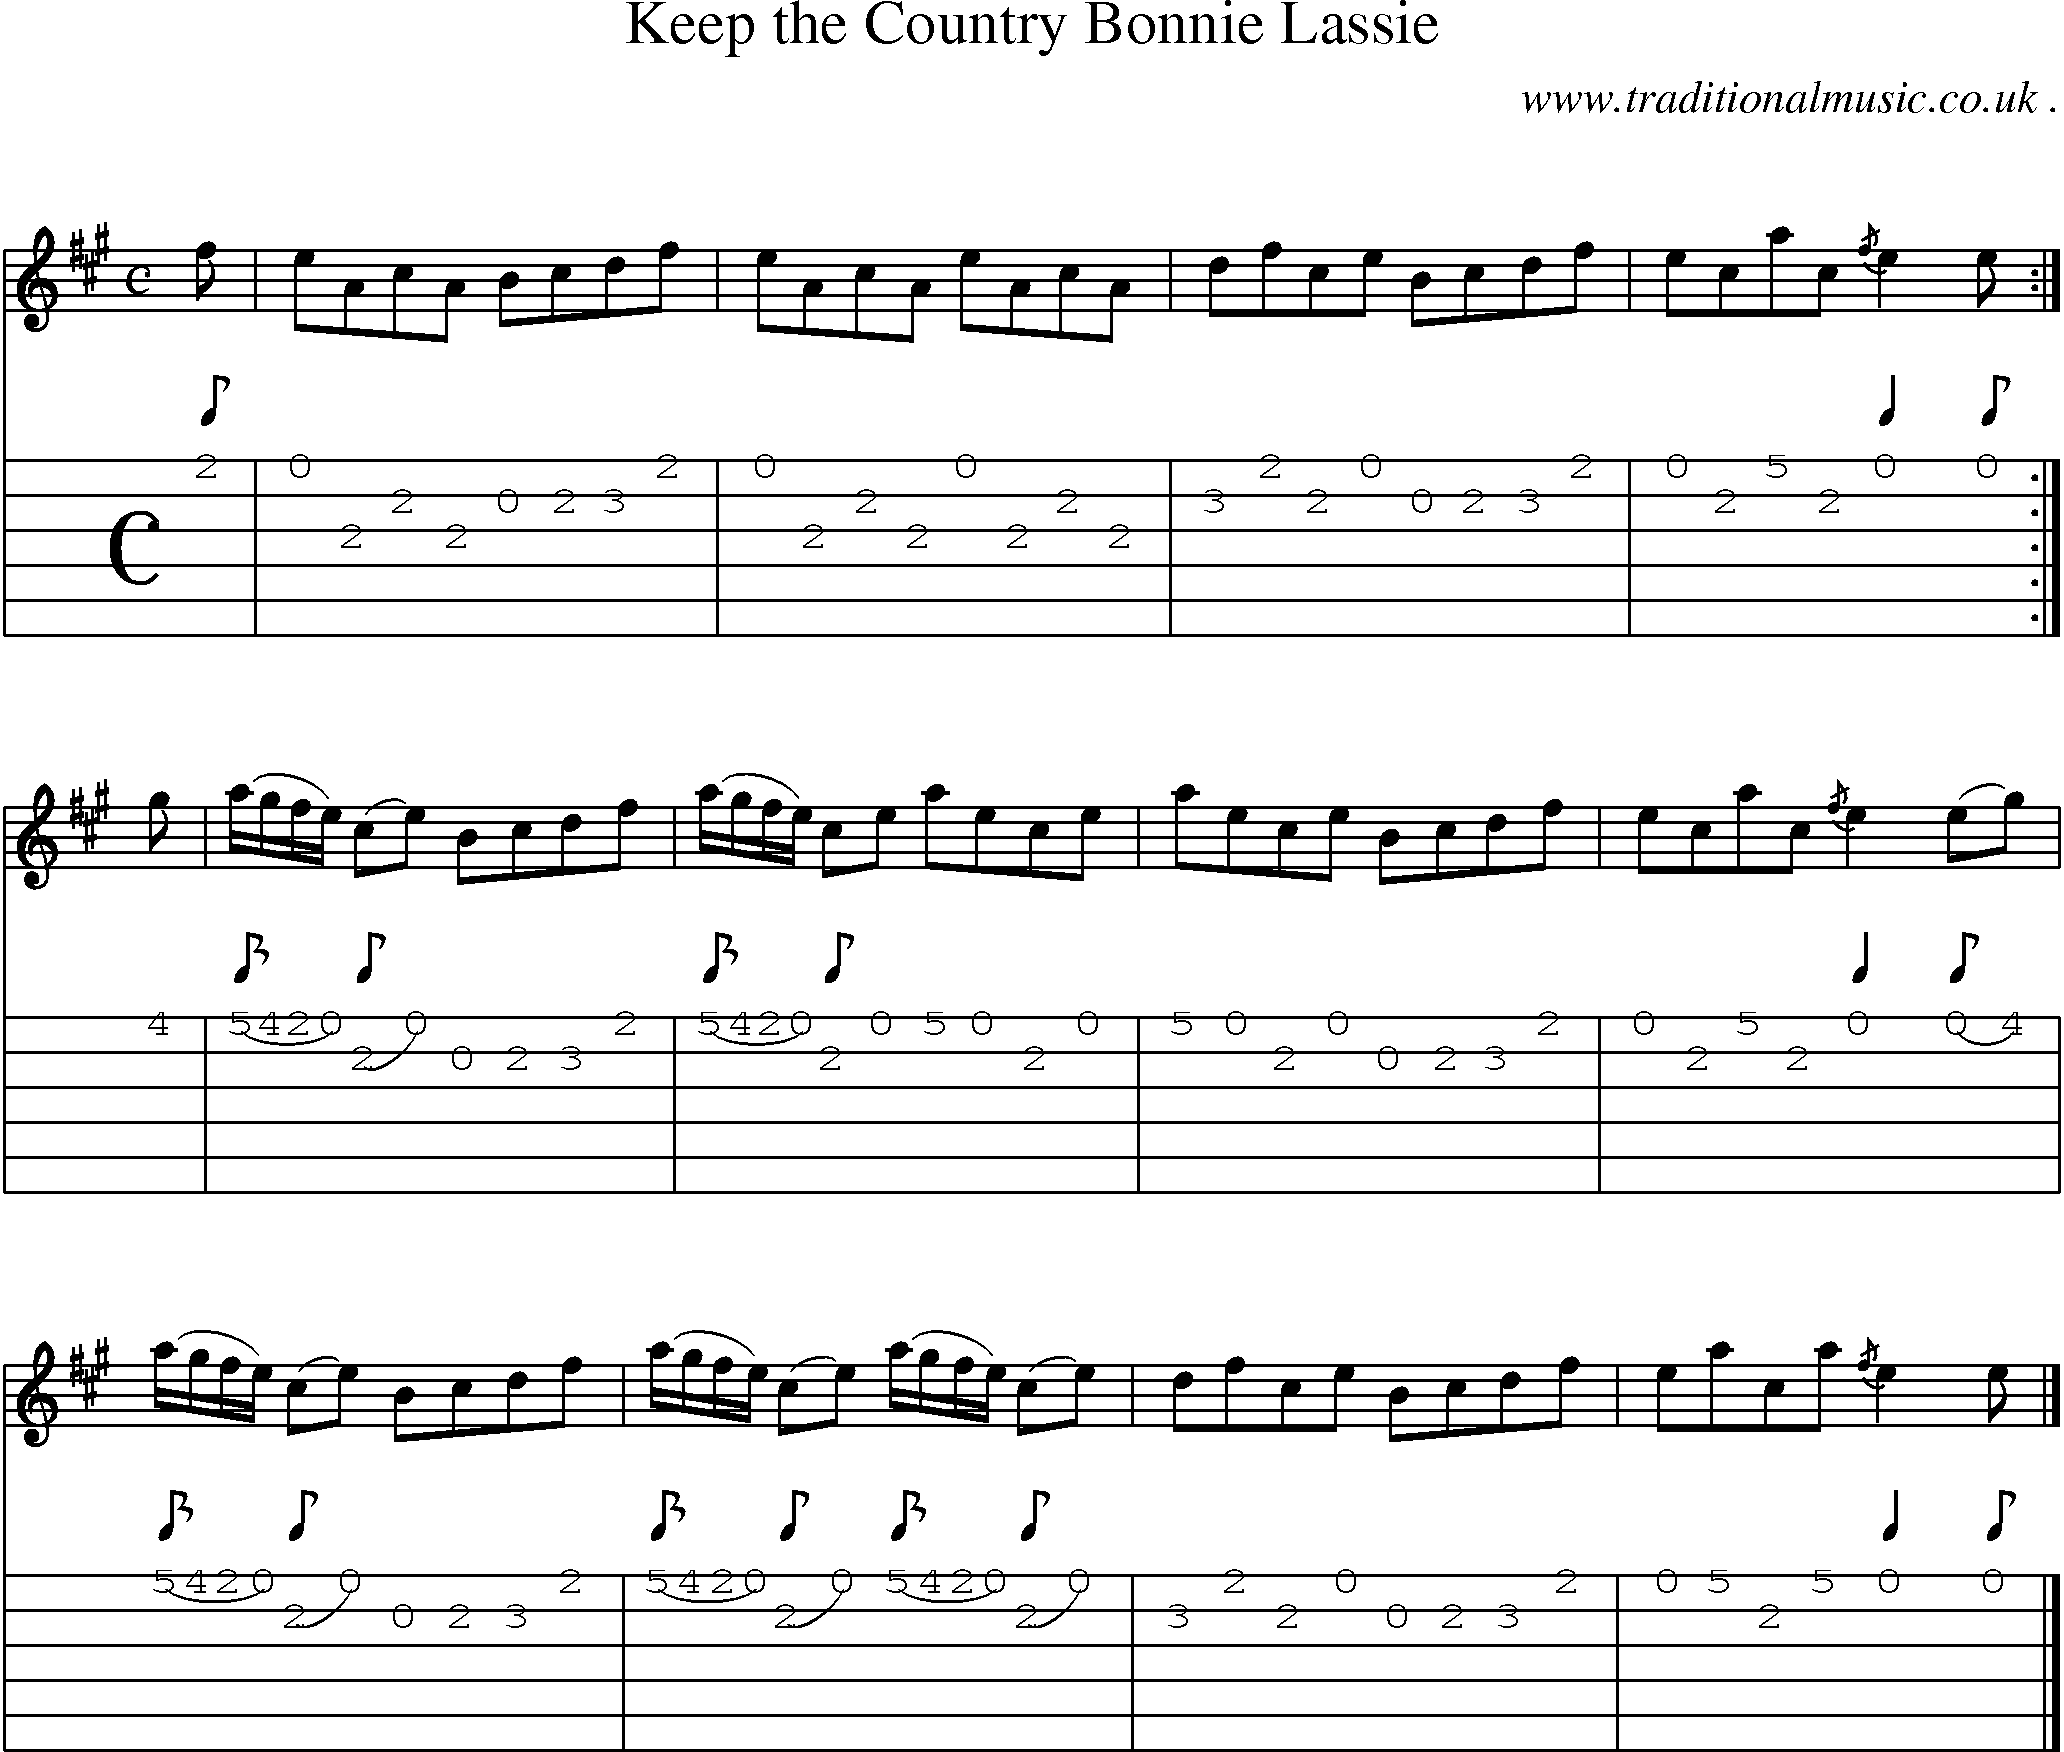 Sheet-music  score, Chords and Guitar Tabs for Keep The Country Bonnie Lassie